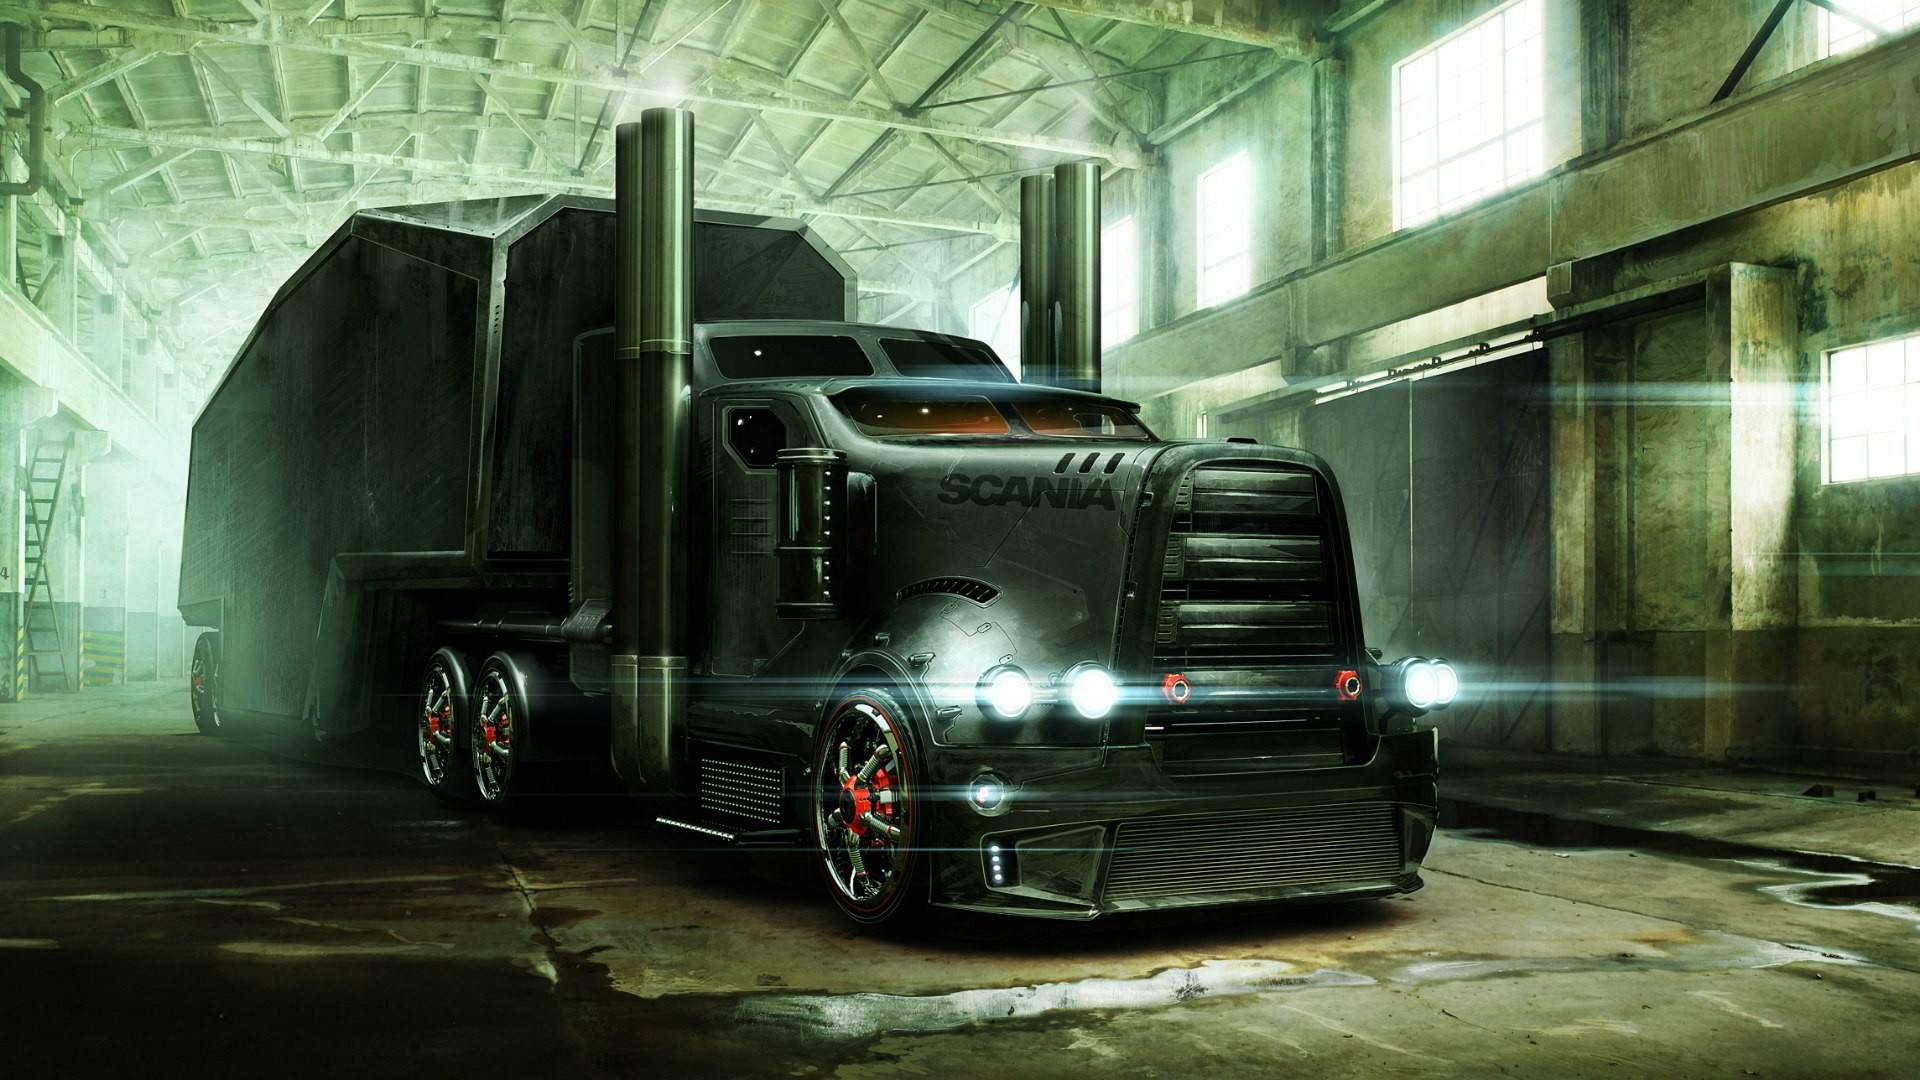 1920x1080 Was searching for a cool truck wallpaper and came across this beaut. Anyone  know if it exists as a mod for ETS2 or ATS? I really, really hope so.